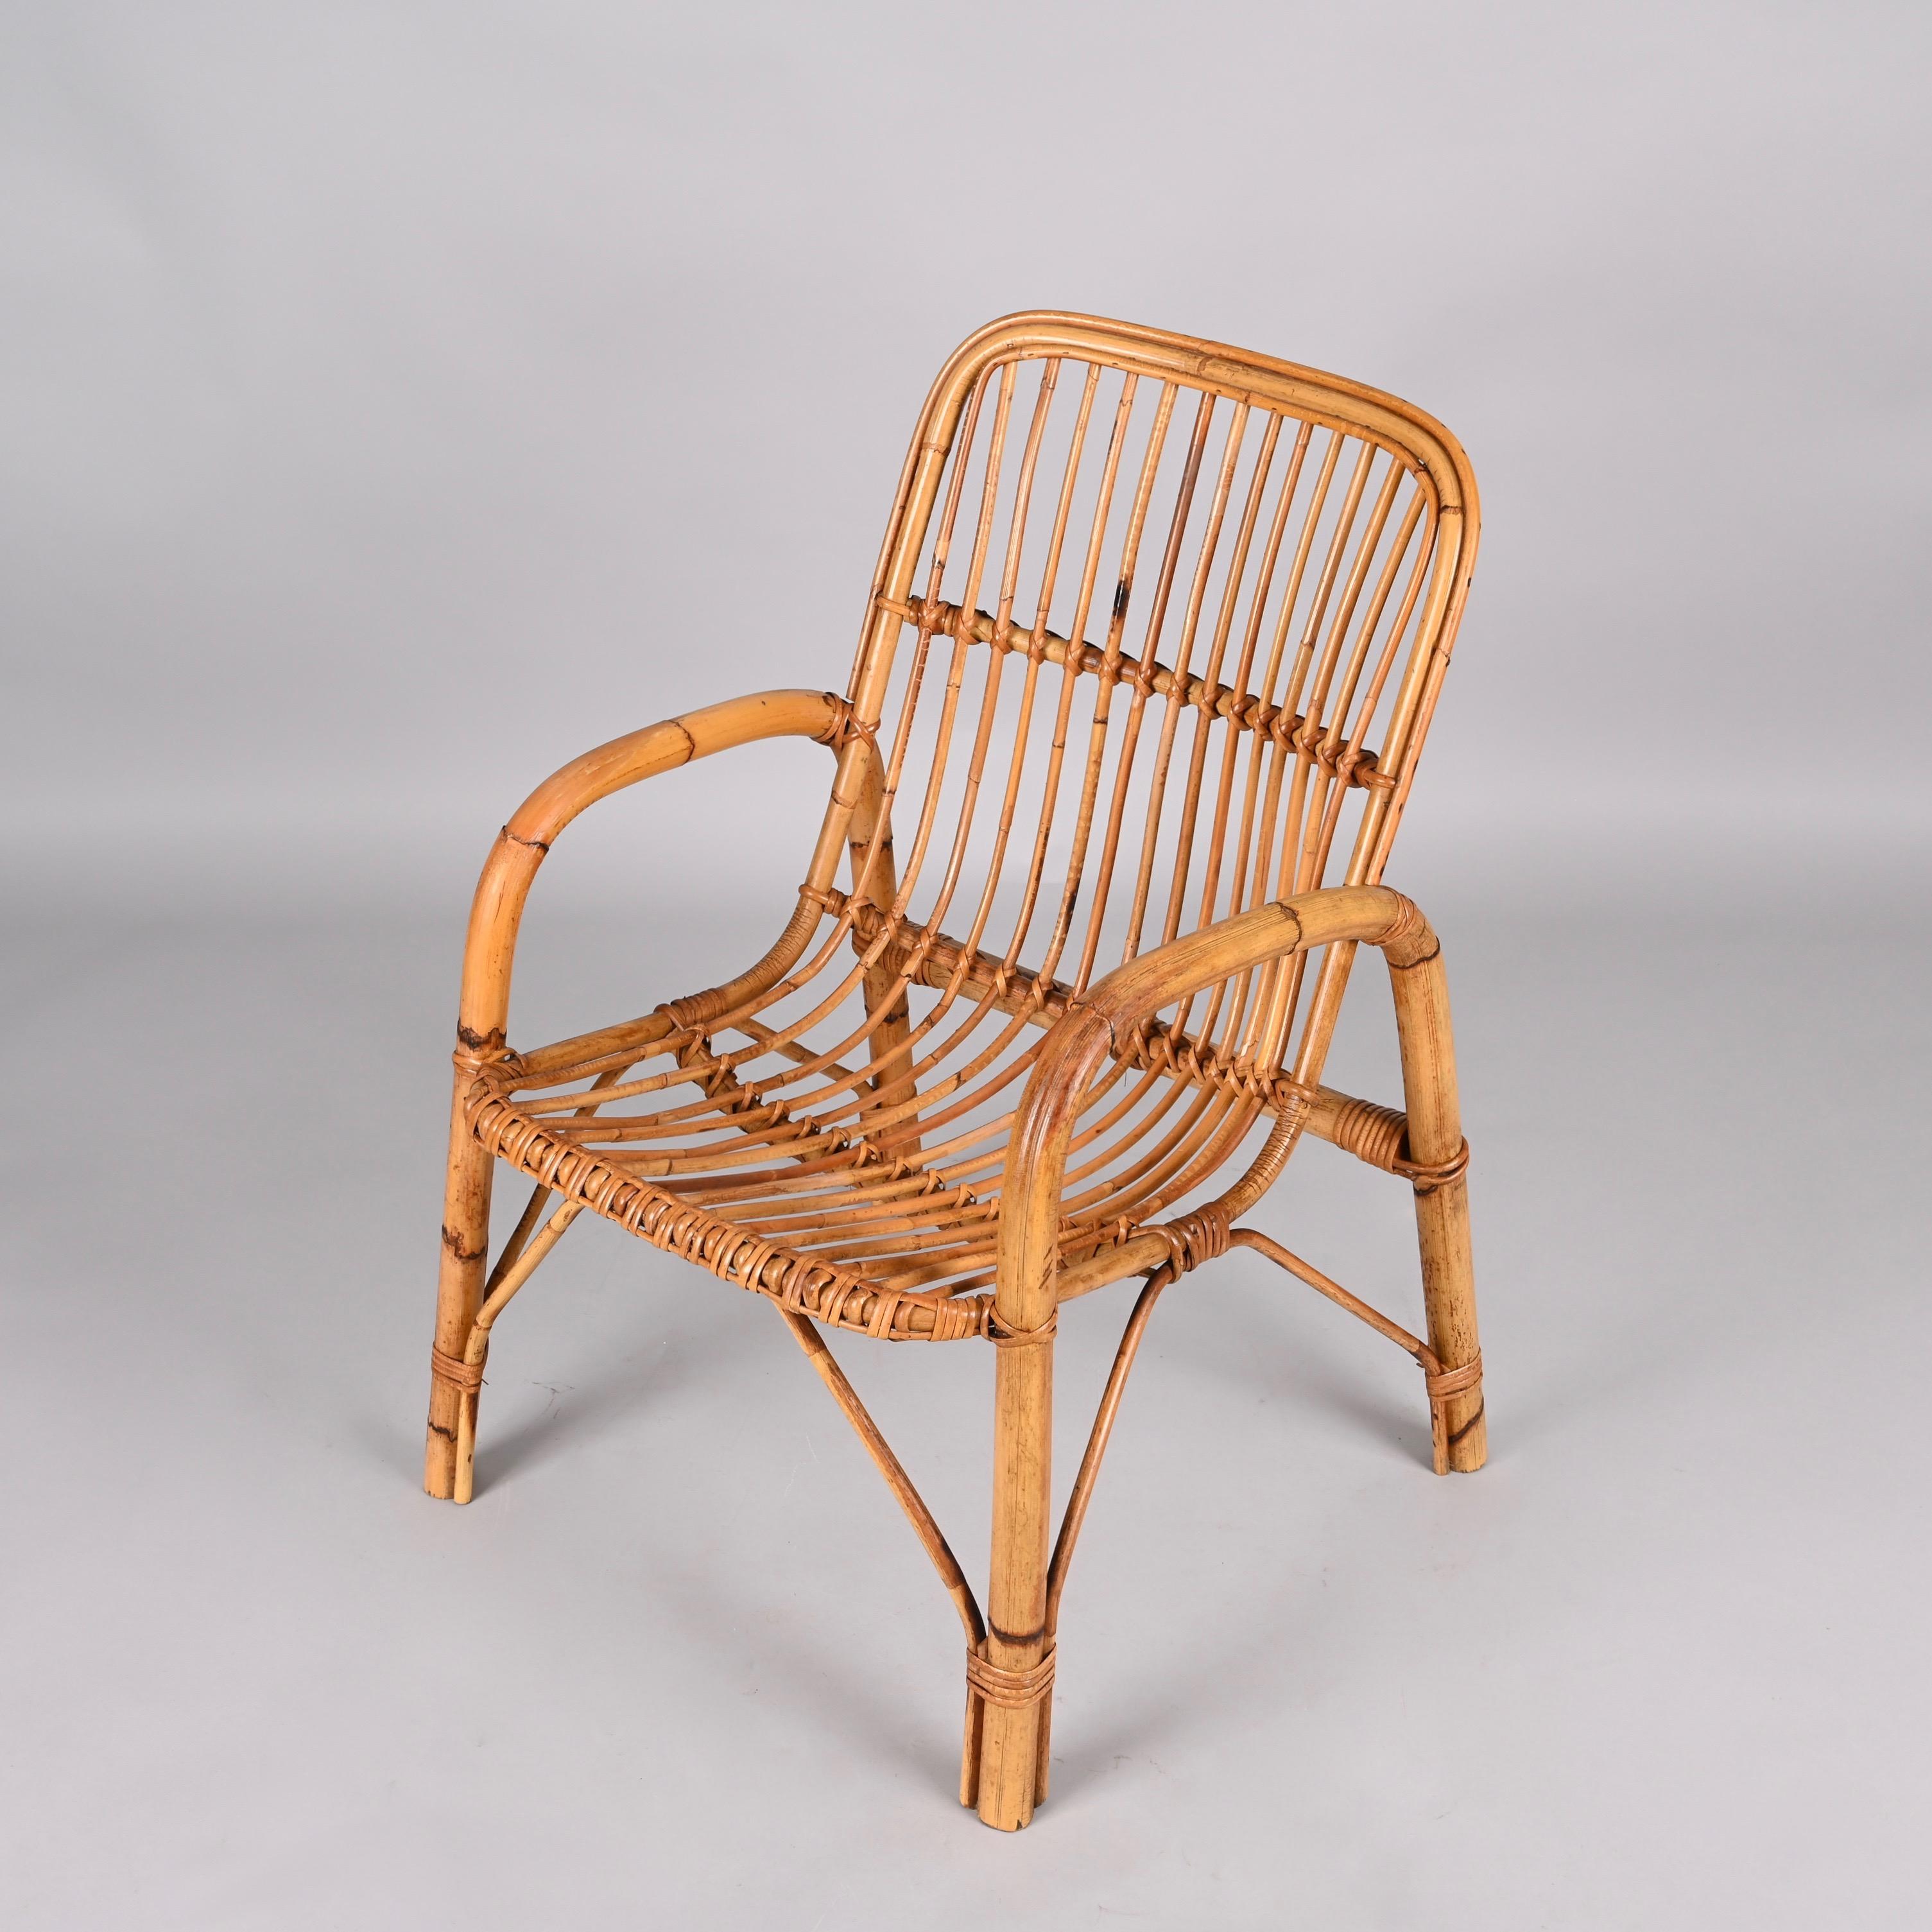 Midcentury French Riviera Rattan and Bamboo Italian Armchair, 1960s For Sale 7